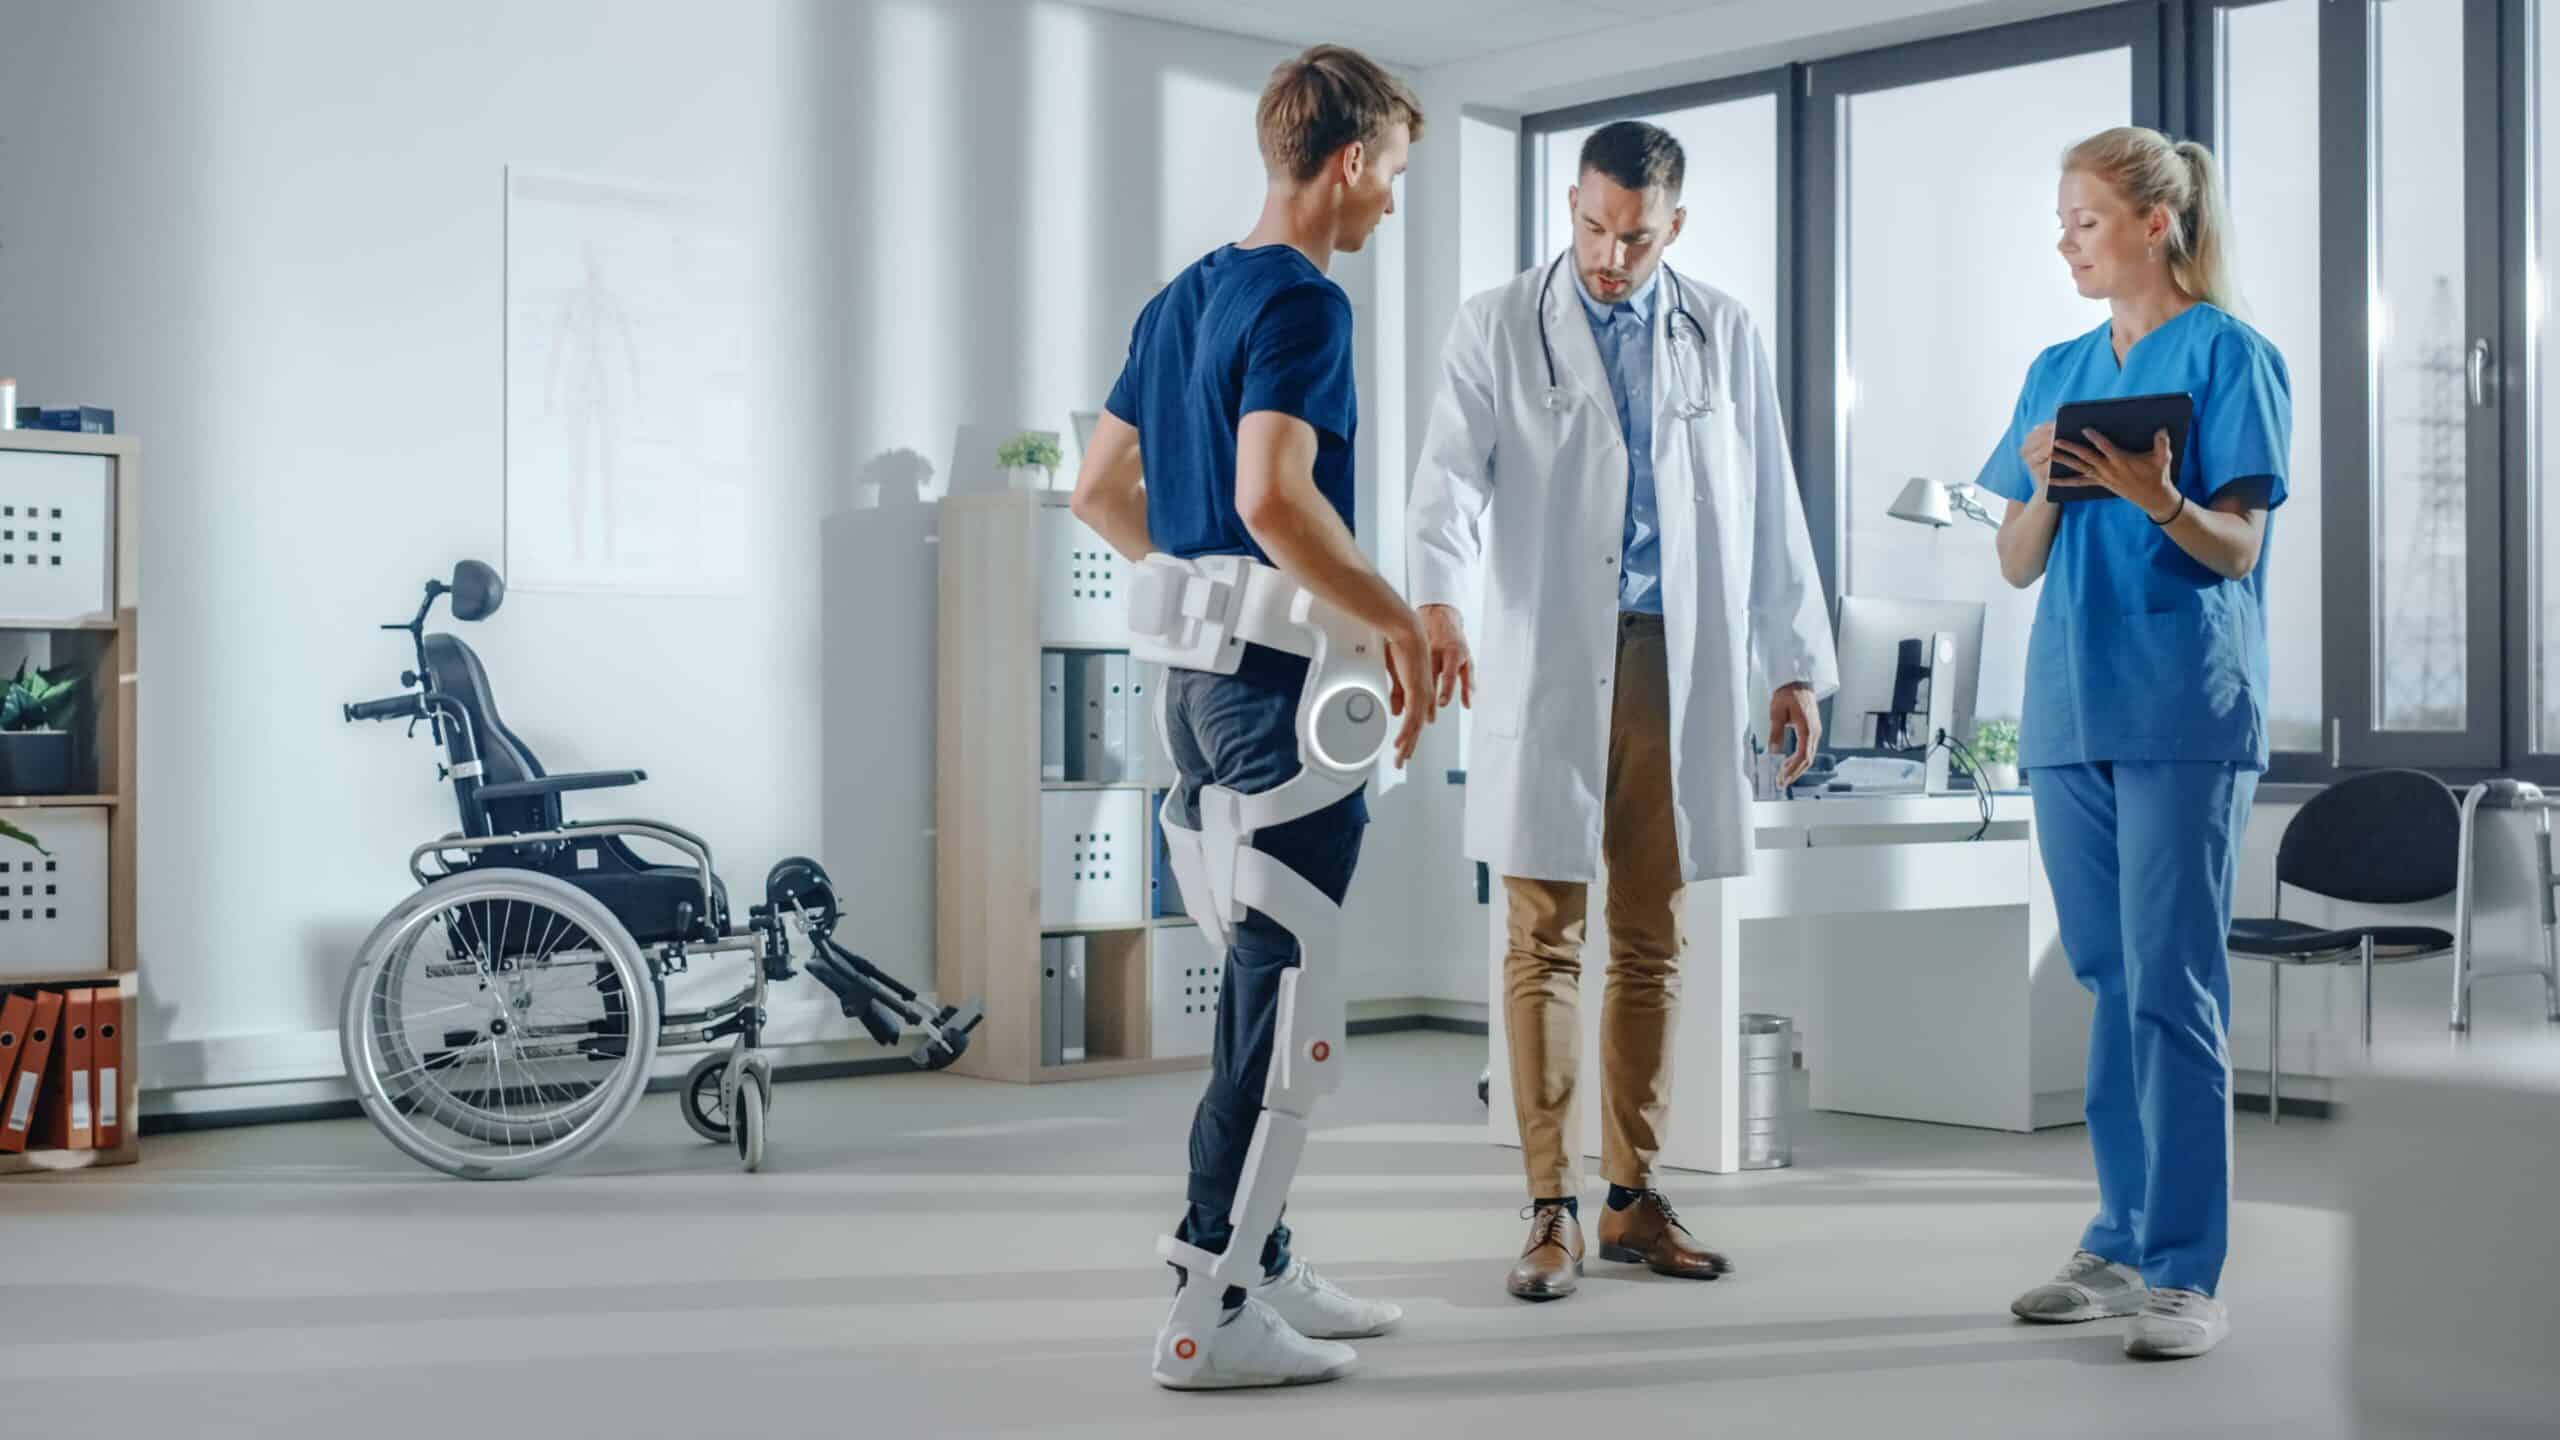 A patient in a leg exoskeleton is assisted by medical staff in a clinic, with a wheelchair in the background.